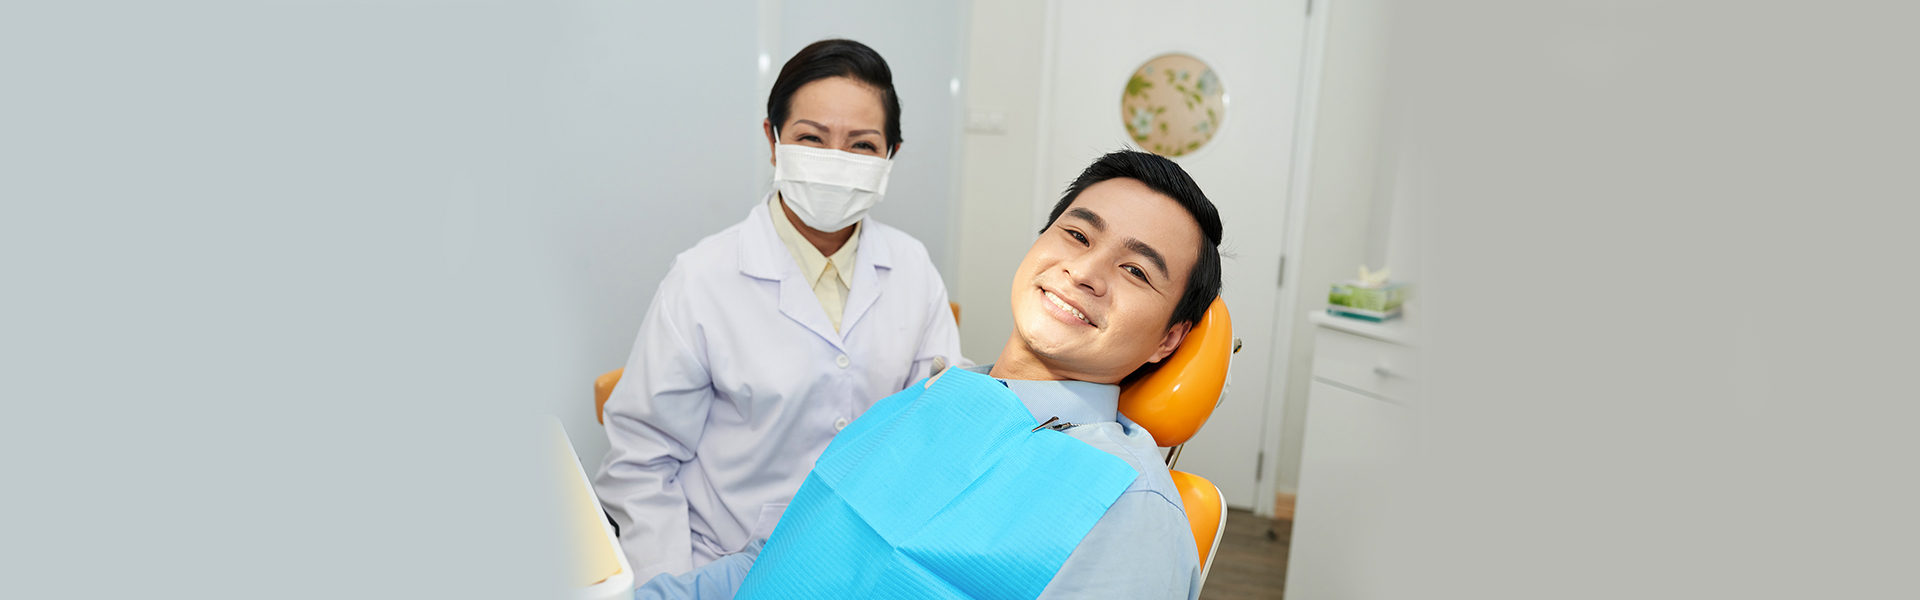 Are Dental Exams and Cleanings Necessary for Oral Health?